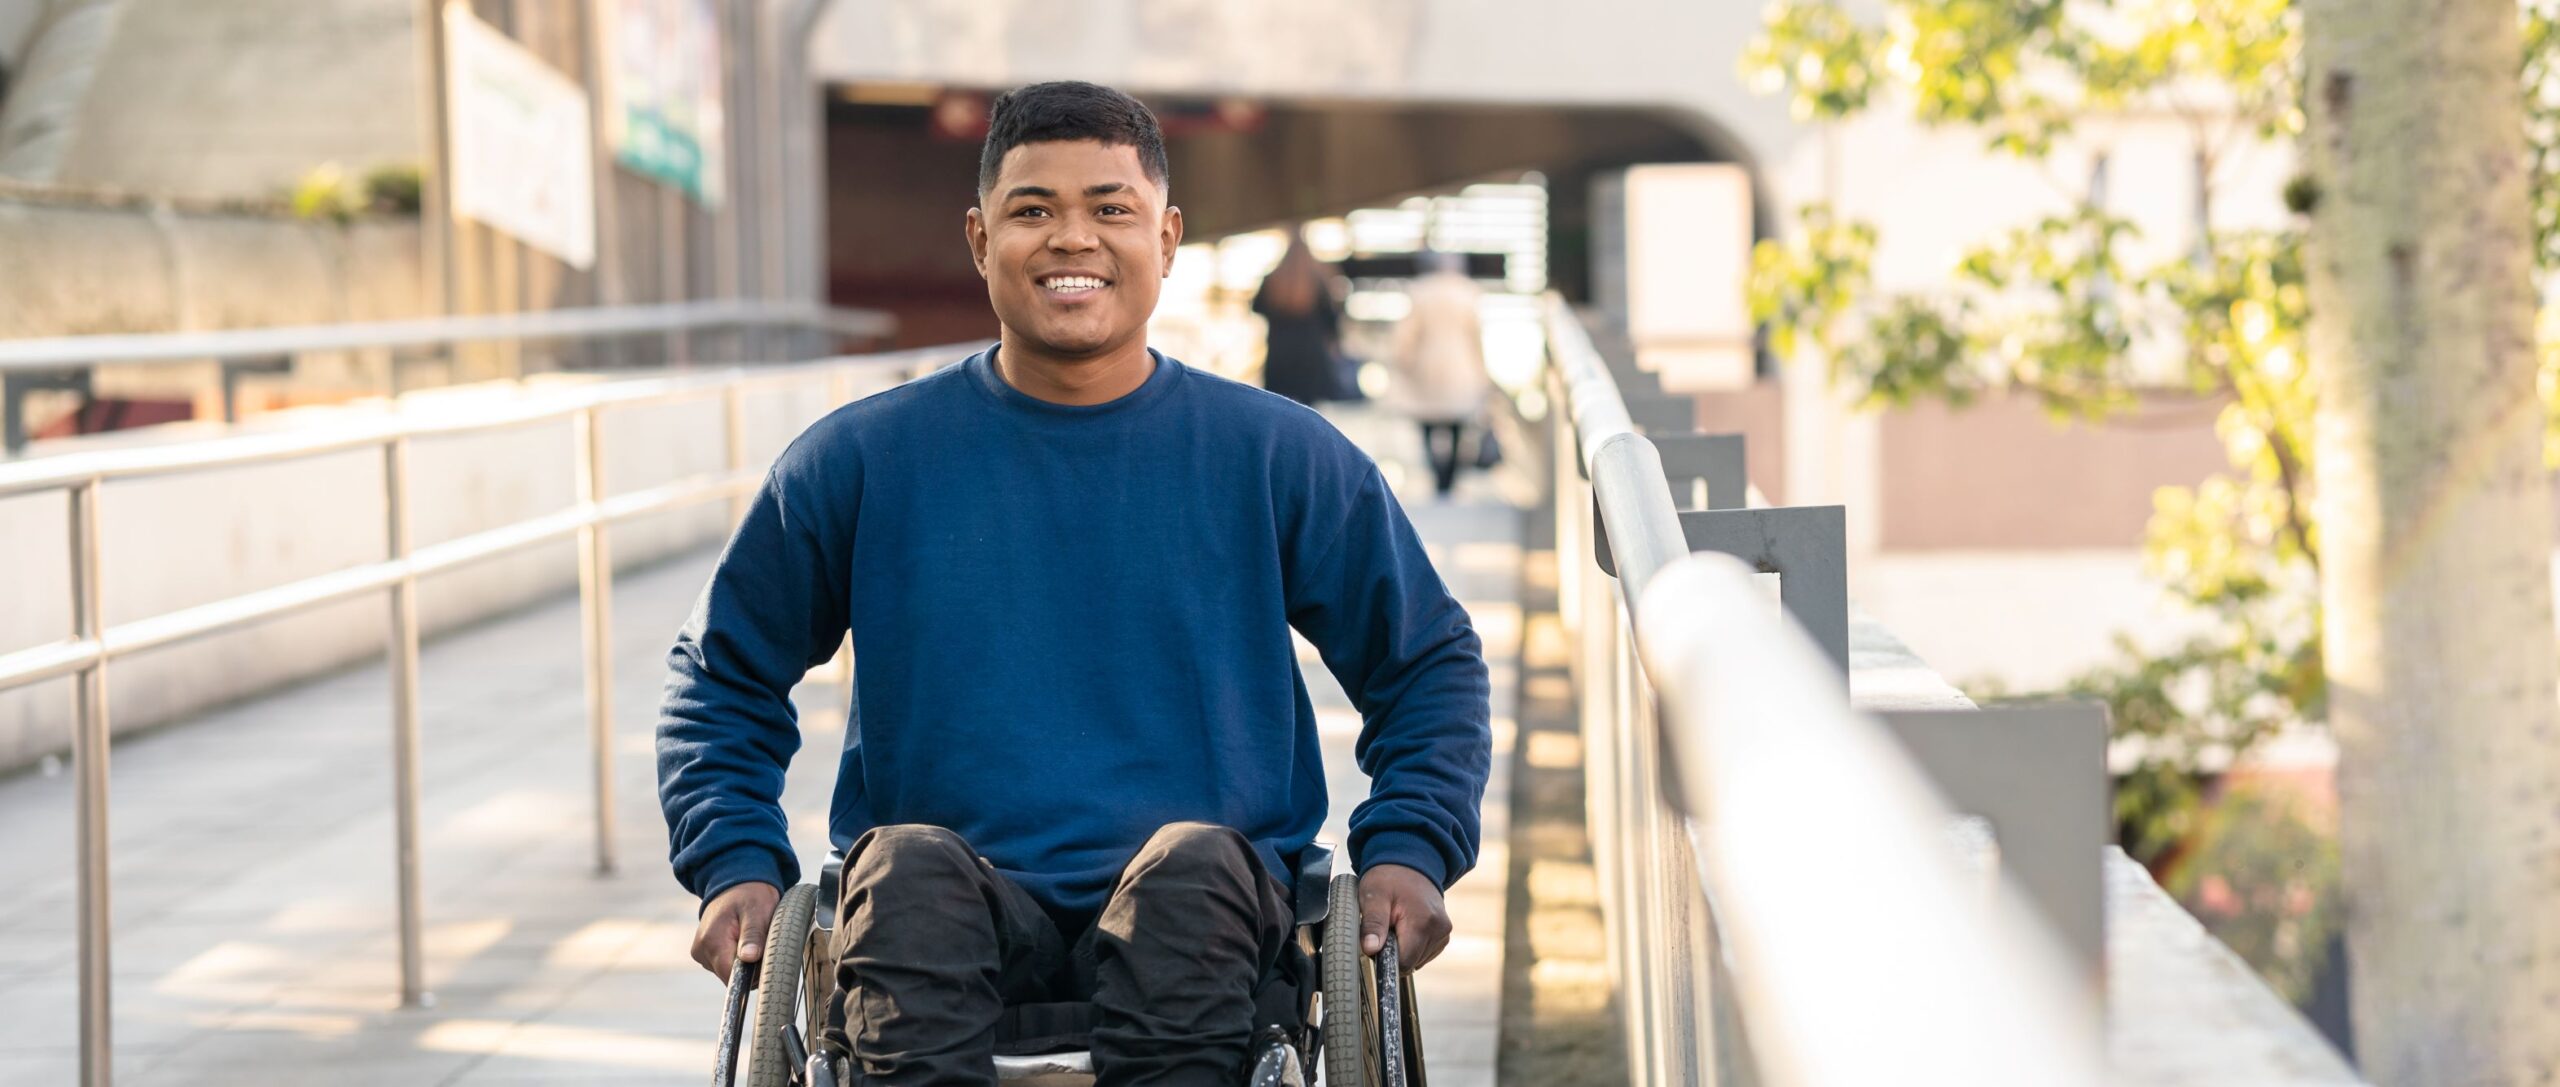 Young man sitting in a wheelchair wearing a blue shirt and black pants.